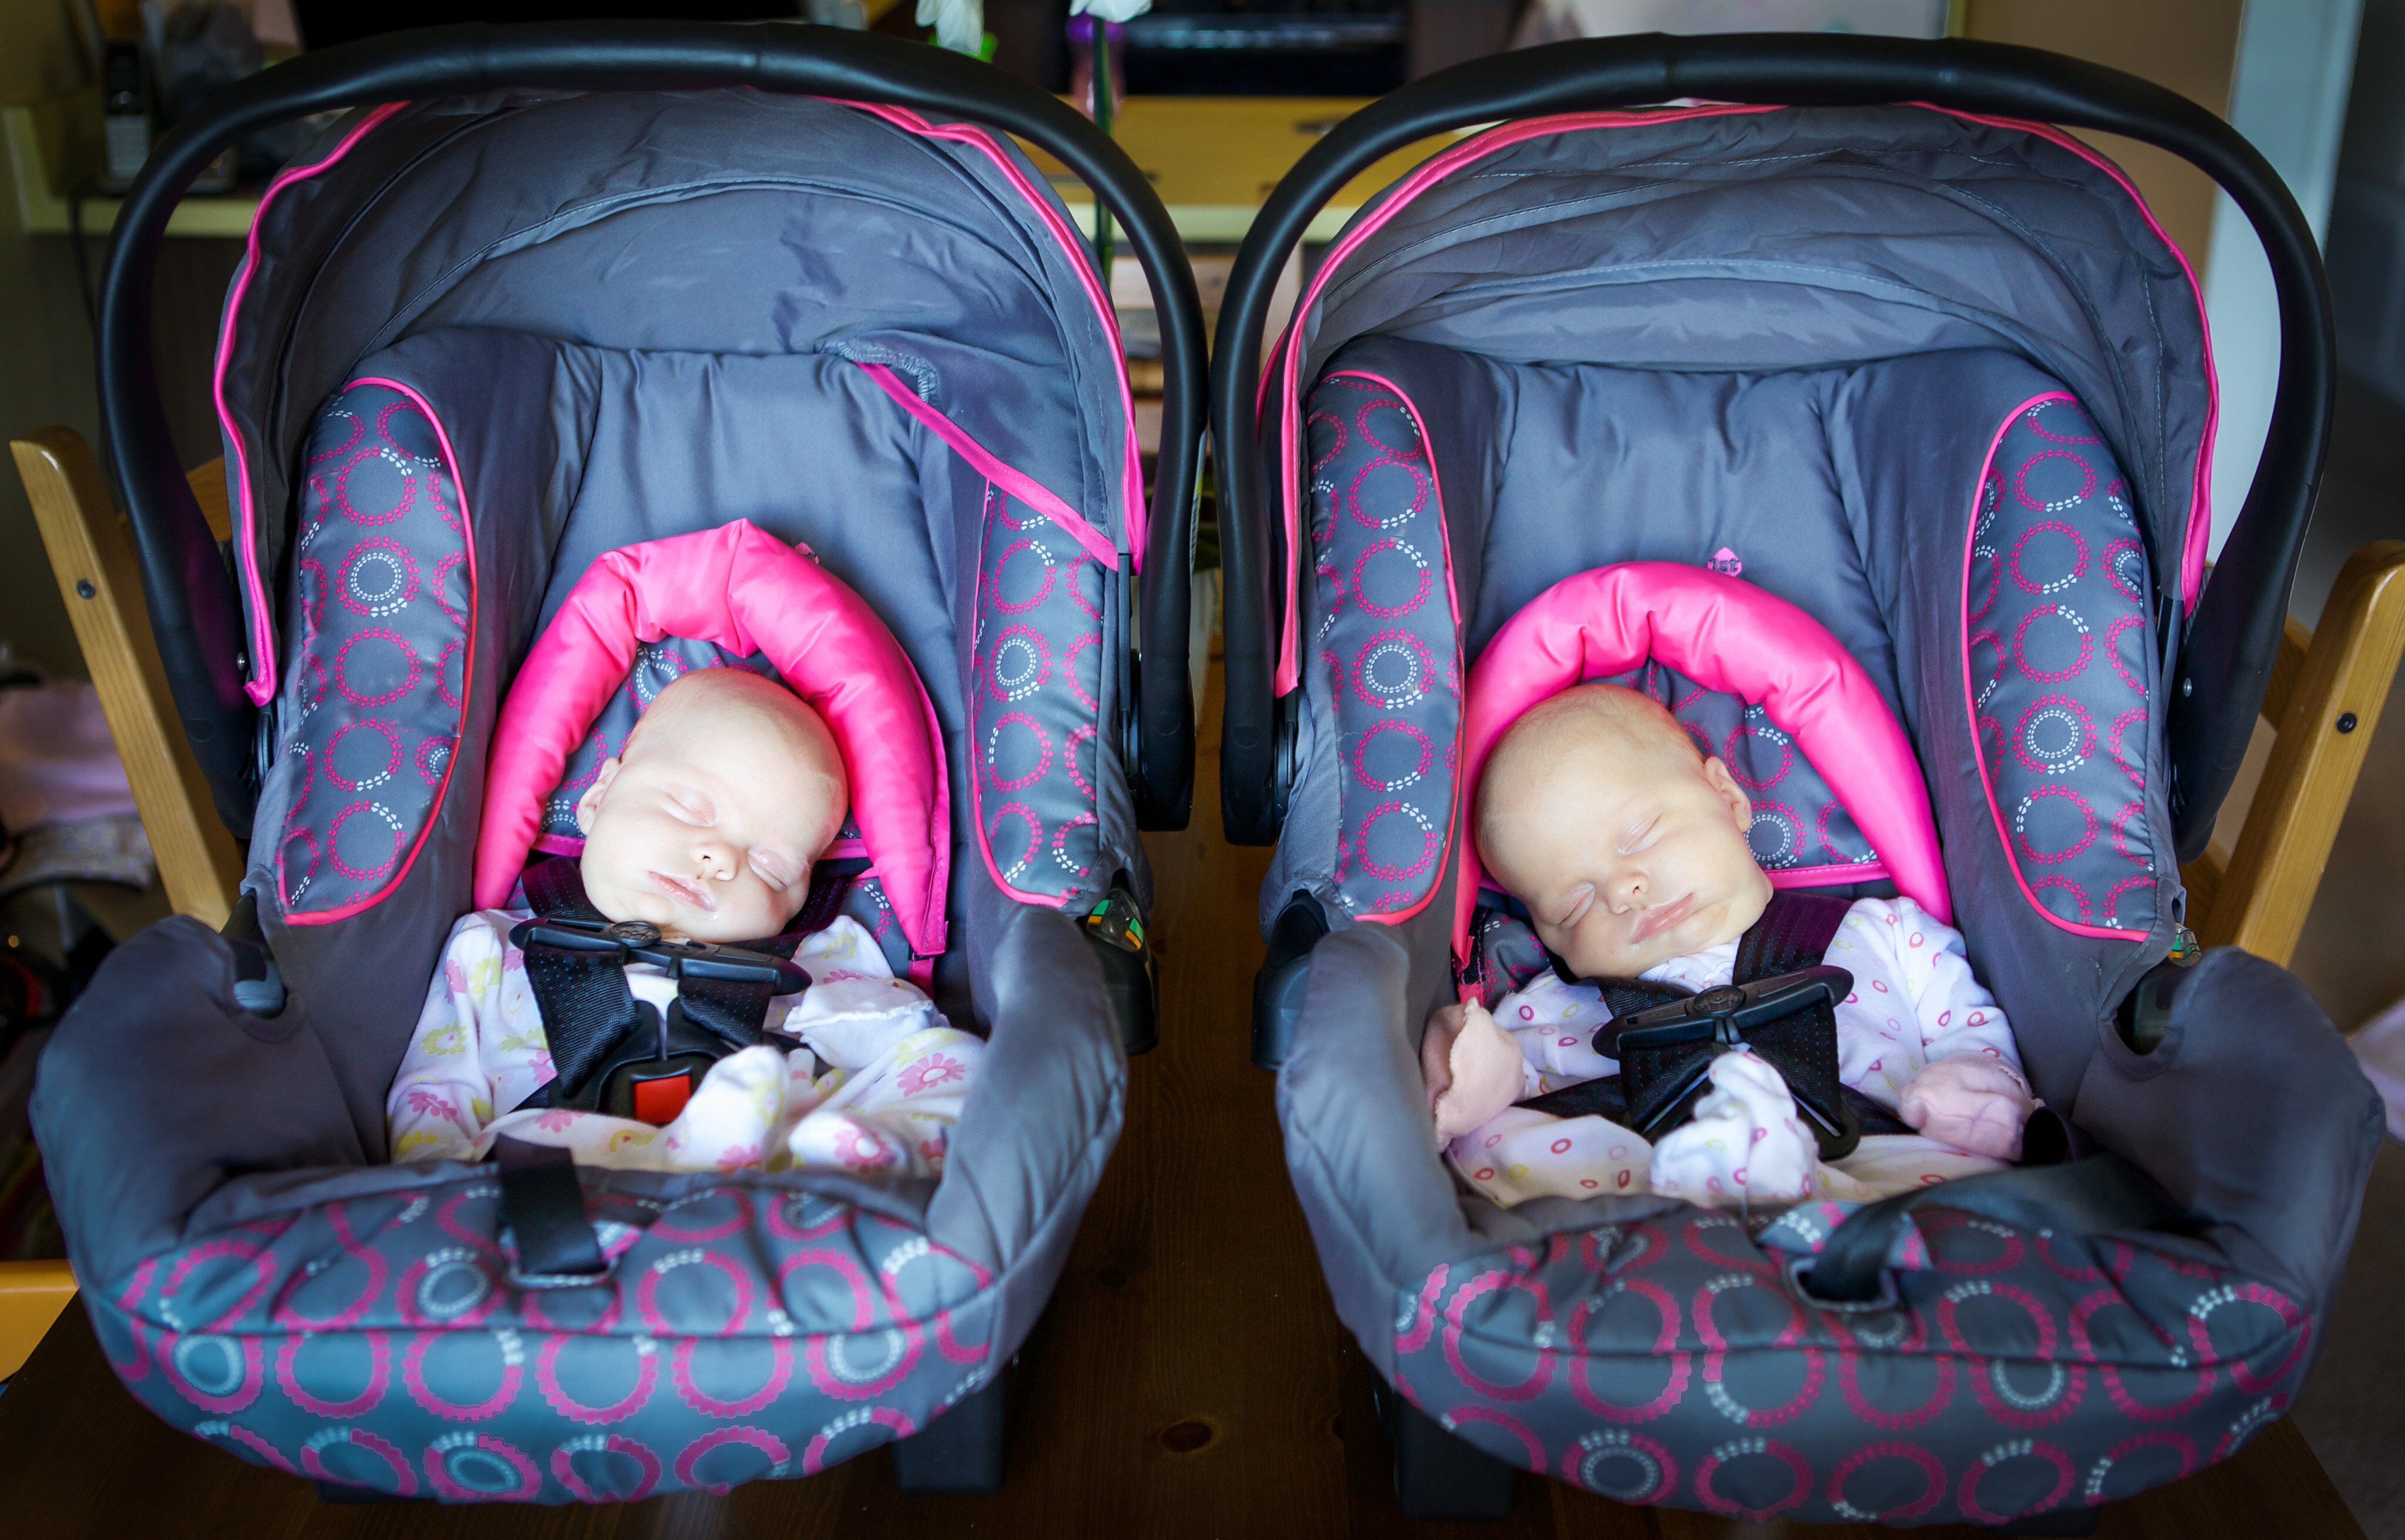 They may look like angels when they’re sleeping... A new mother relives the lengths to which she and her husband will go to keep their twins from waking prematurely. Photo: Getty Images